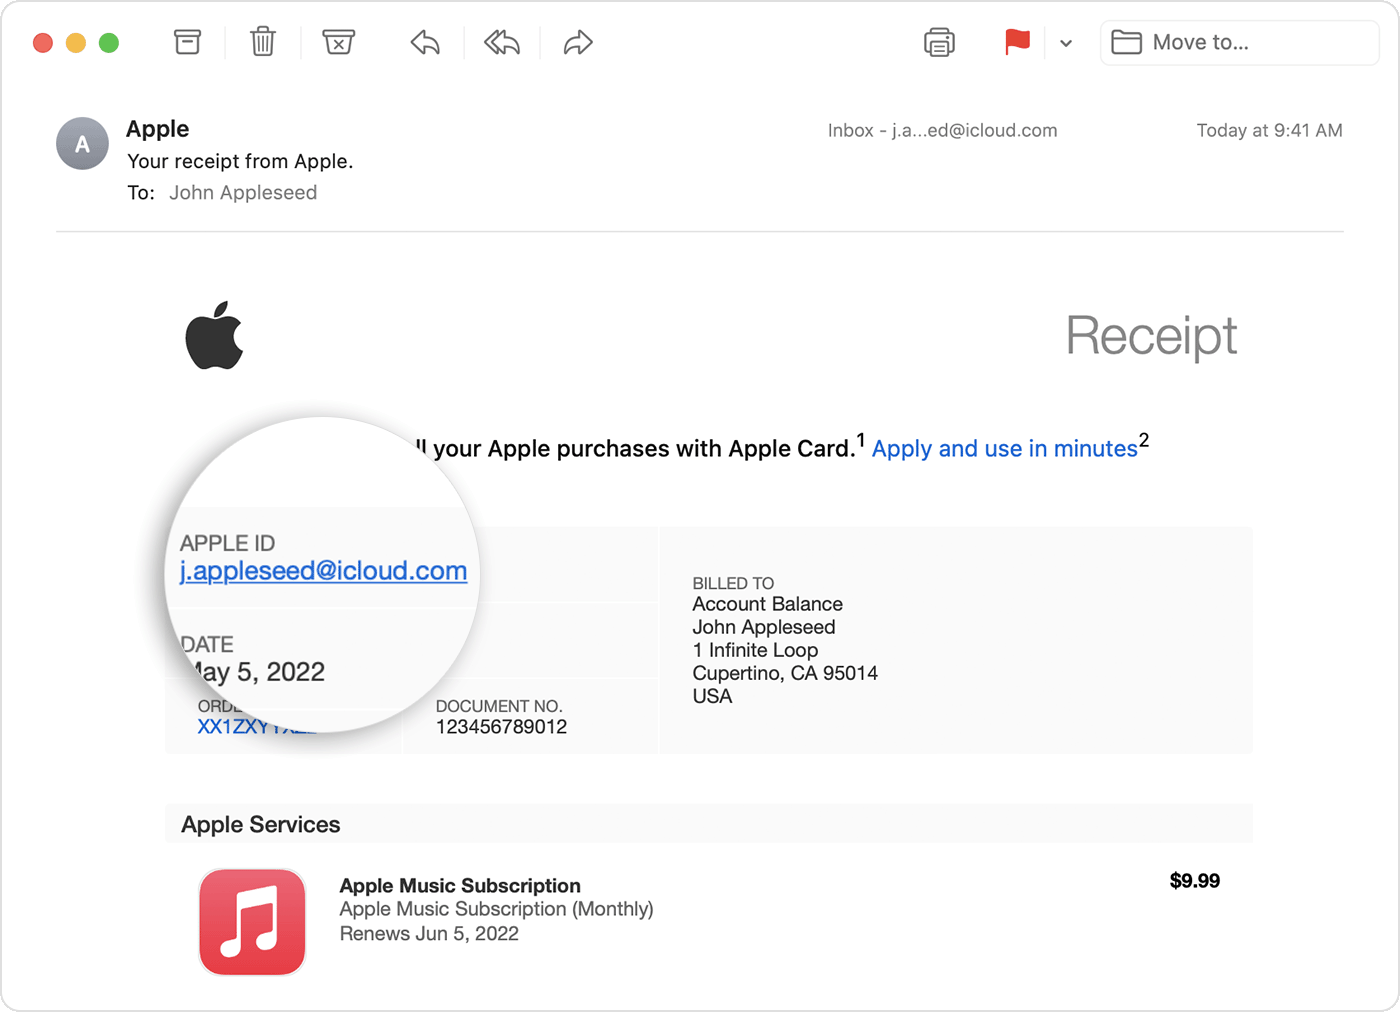 An email invoice from Apple showing the Apple ID of the person who bought the Apple Music subscription.